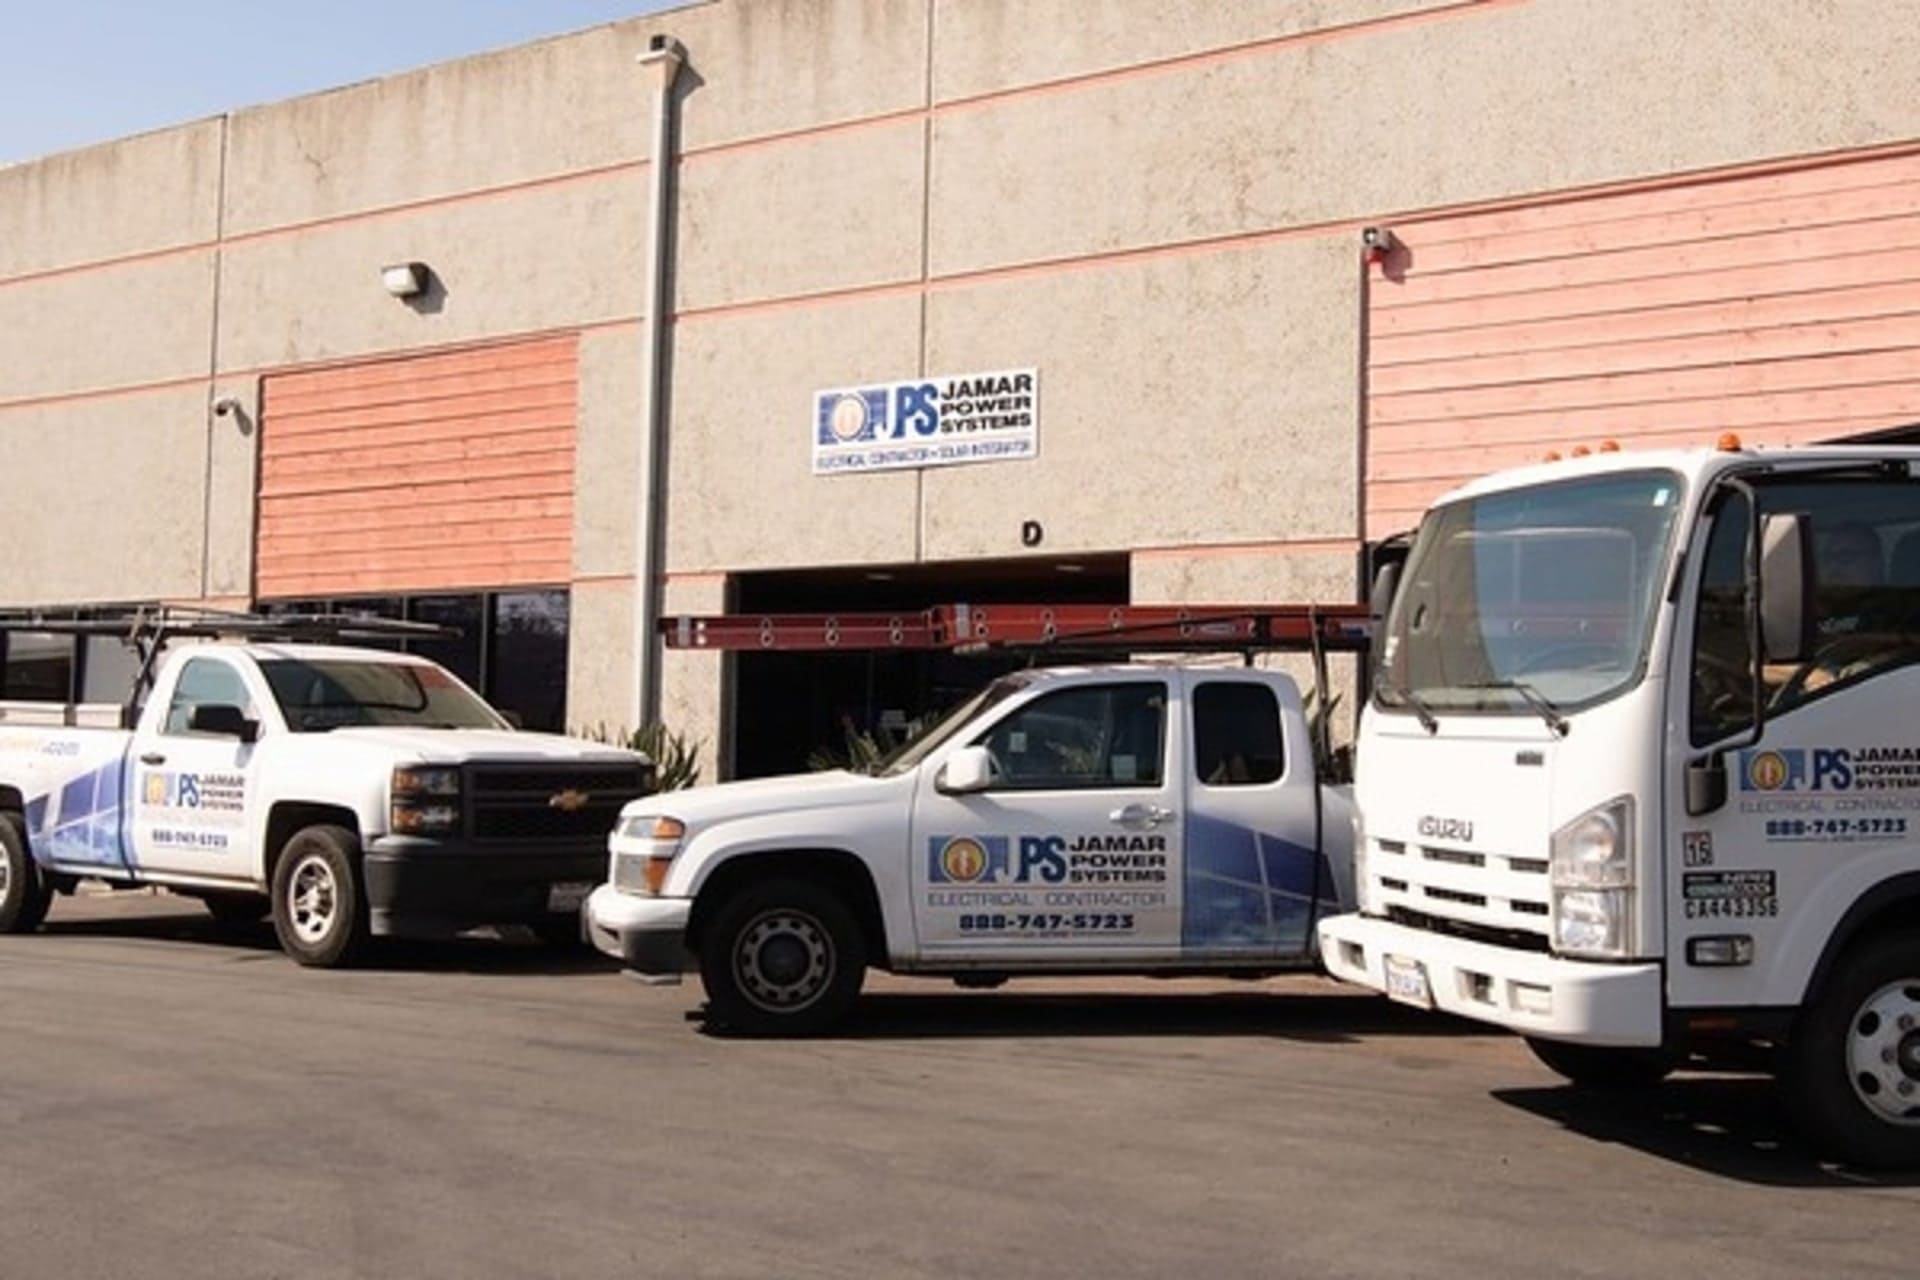 Jamar Power Systems - Santee CA Office Building and Trucks